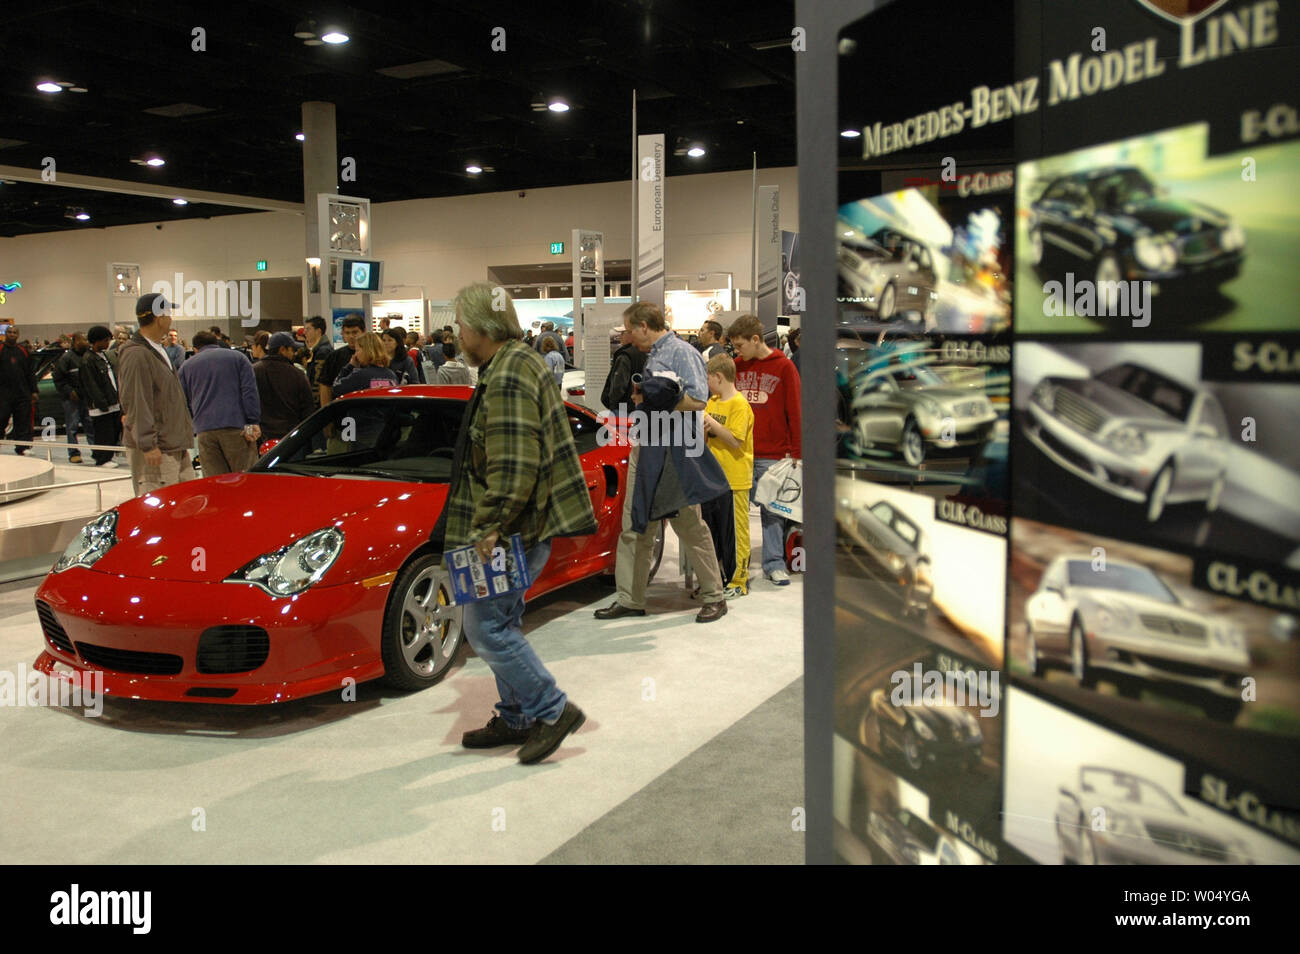 Visitors to the San Diego International Car Show look at a 2005 Porsche 911 Turbo S Cabriolet as well as some of the over 250 2005 and 2006 model vehicles on display at the San Diego Convention Center on December 31, 2004 in San Diego California. The auto show will attract over three hundred thousand people and is the six largest in the country, showcasing concept cars and new releases from the top automakers. ( UPI Photo/Earl S. Cryer) Stock Photo